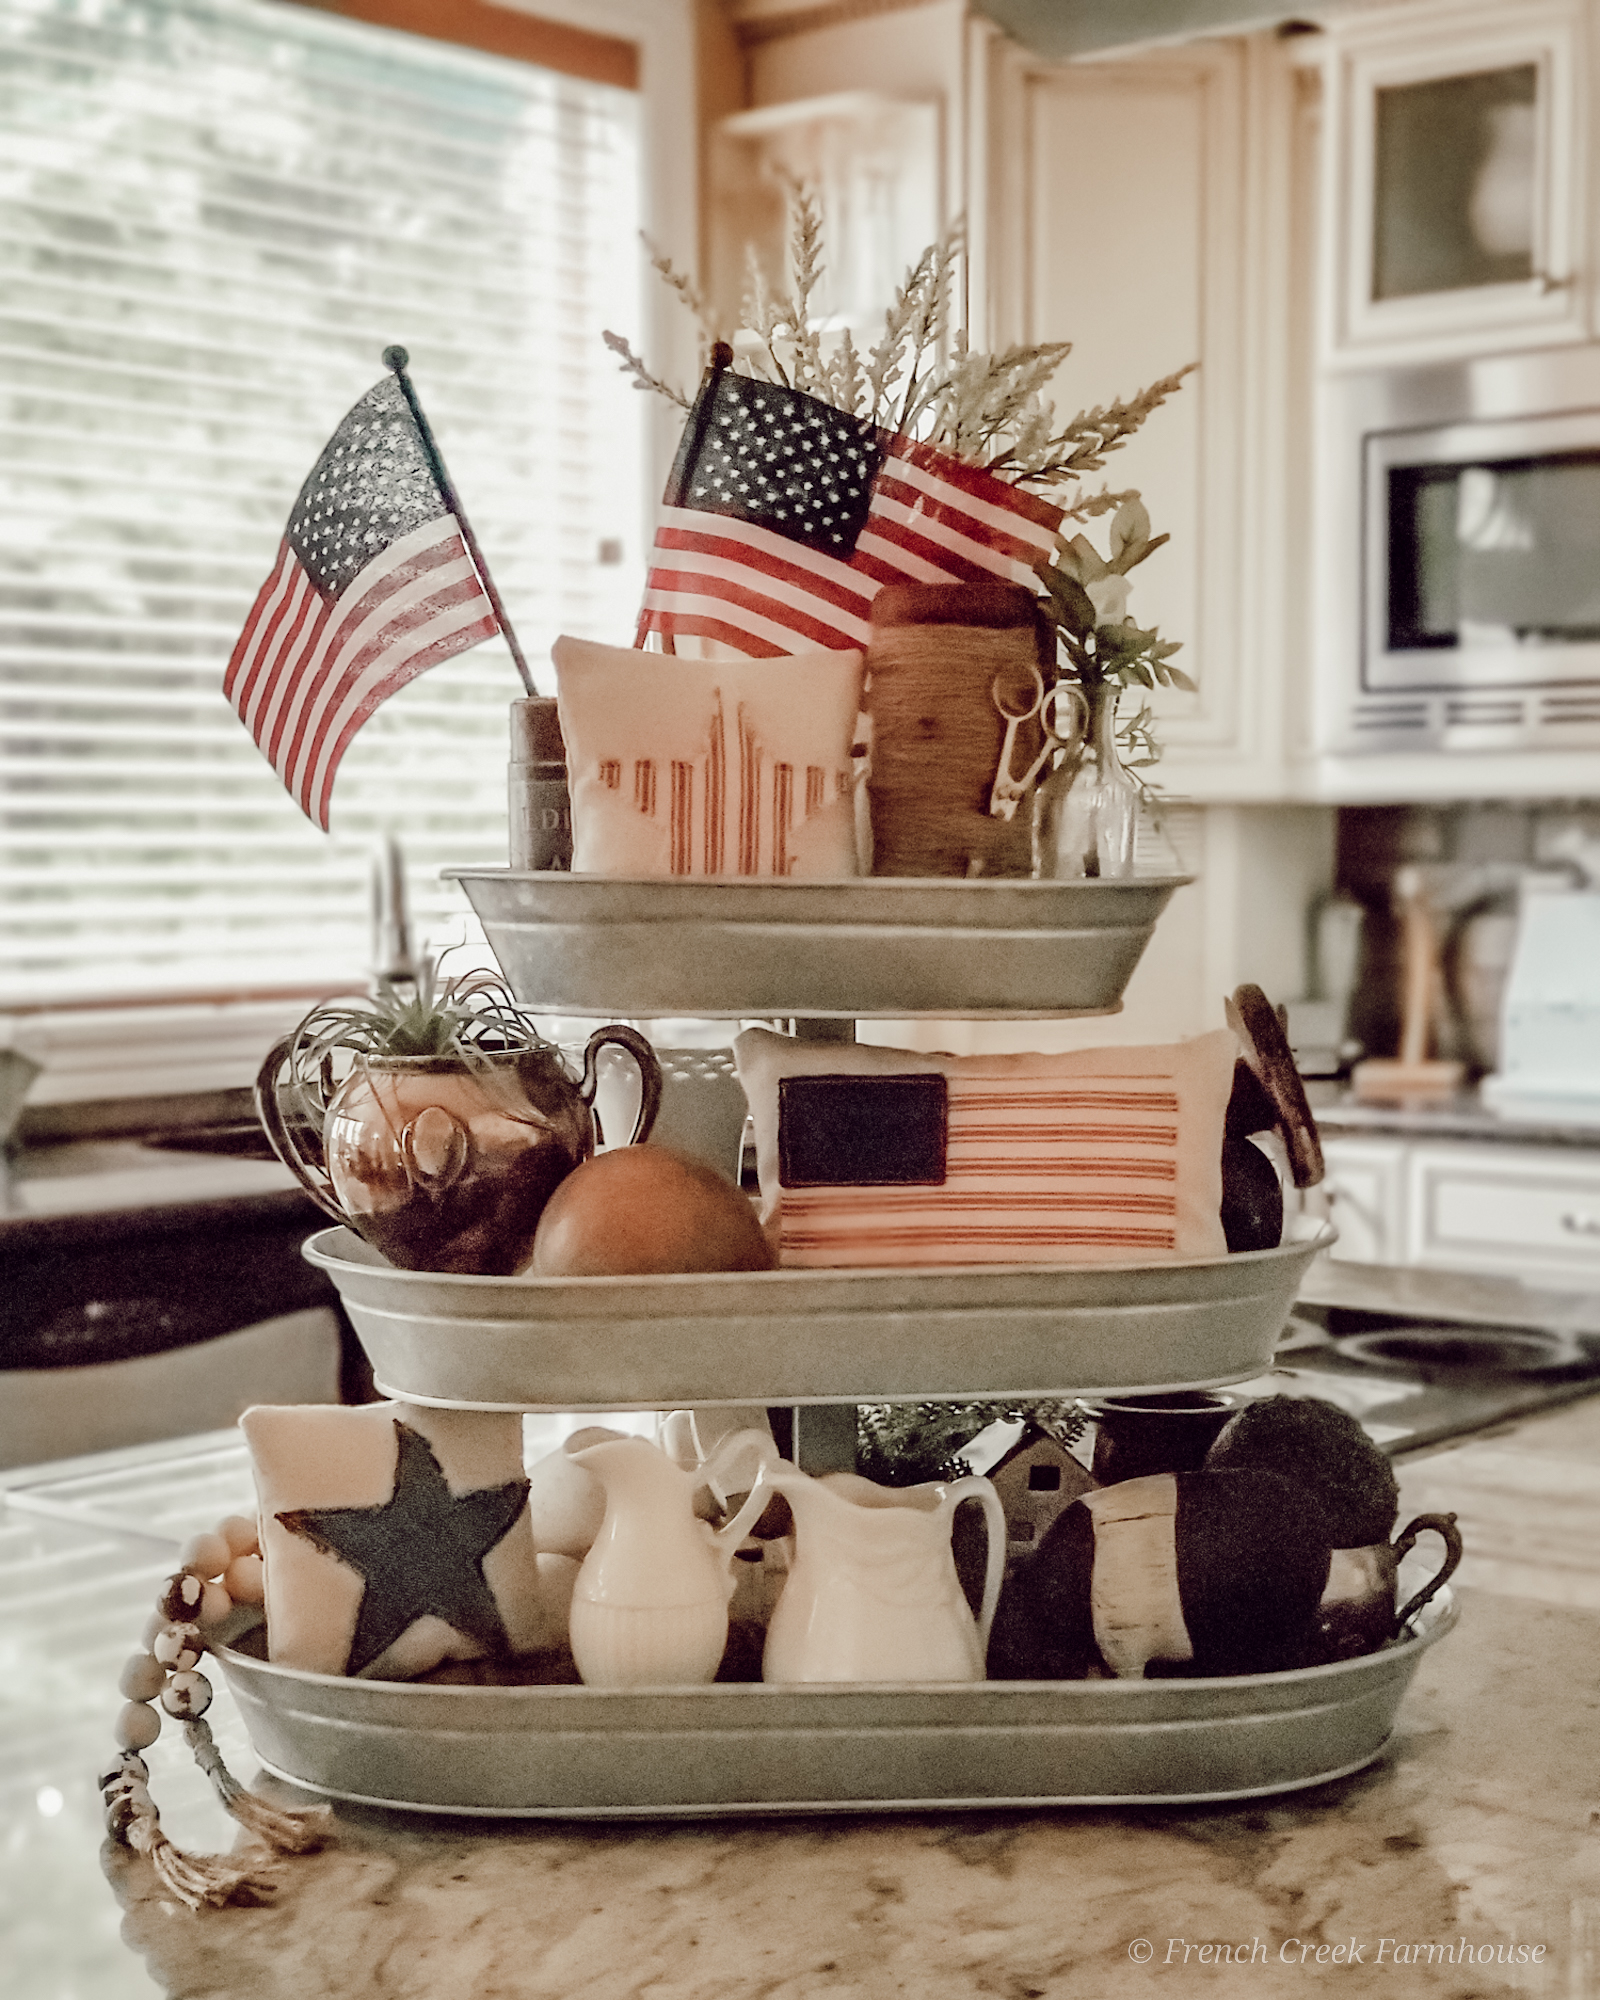 3-Tiered tray with patriotic decor on kitchen island